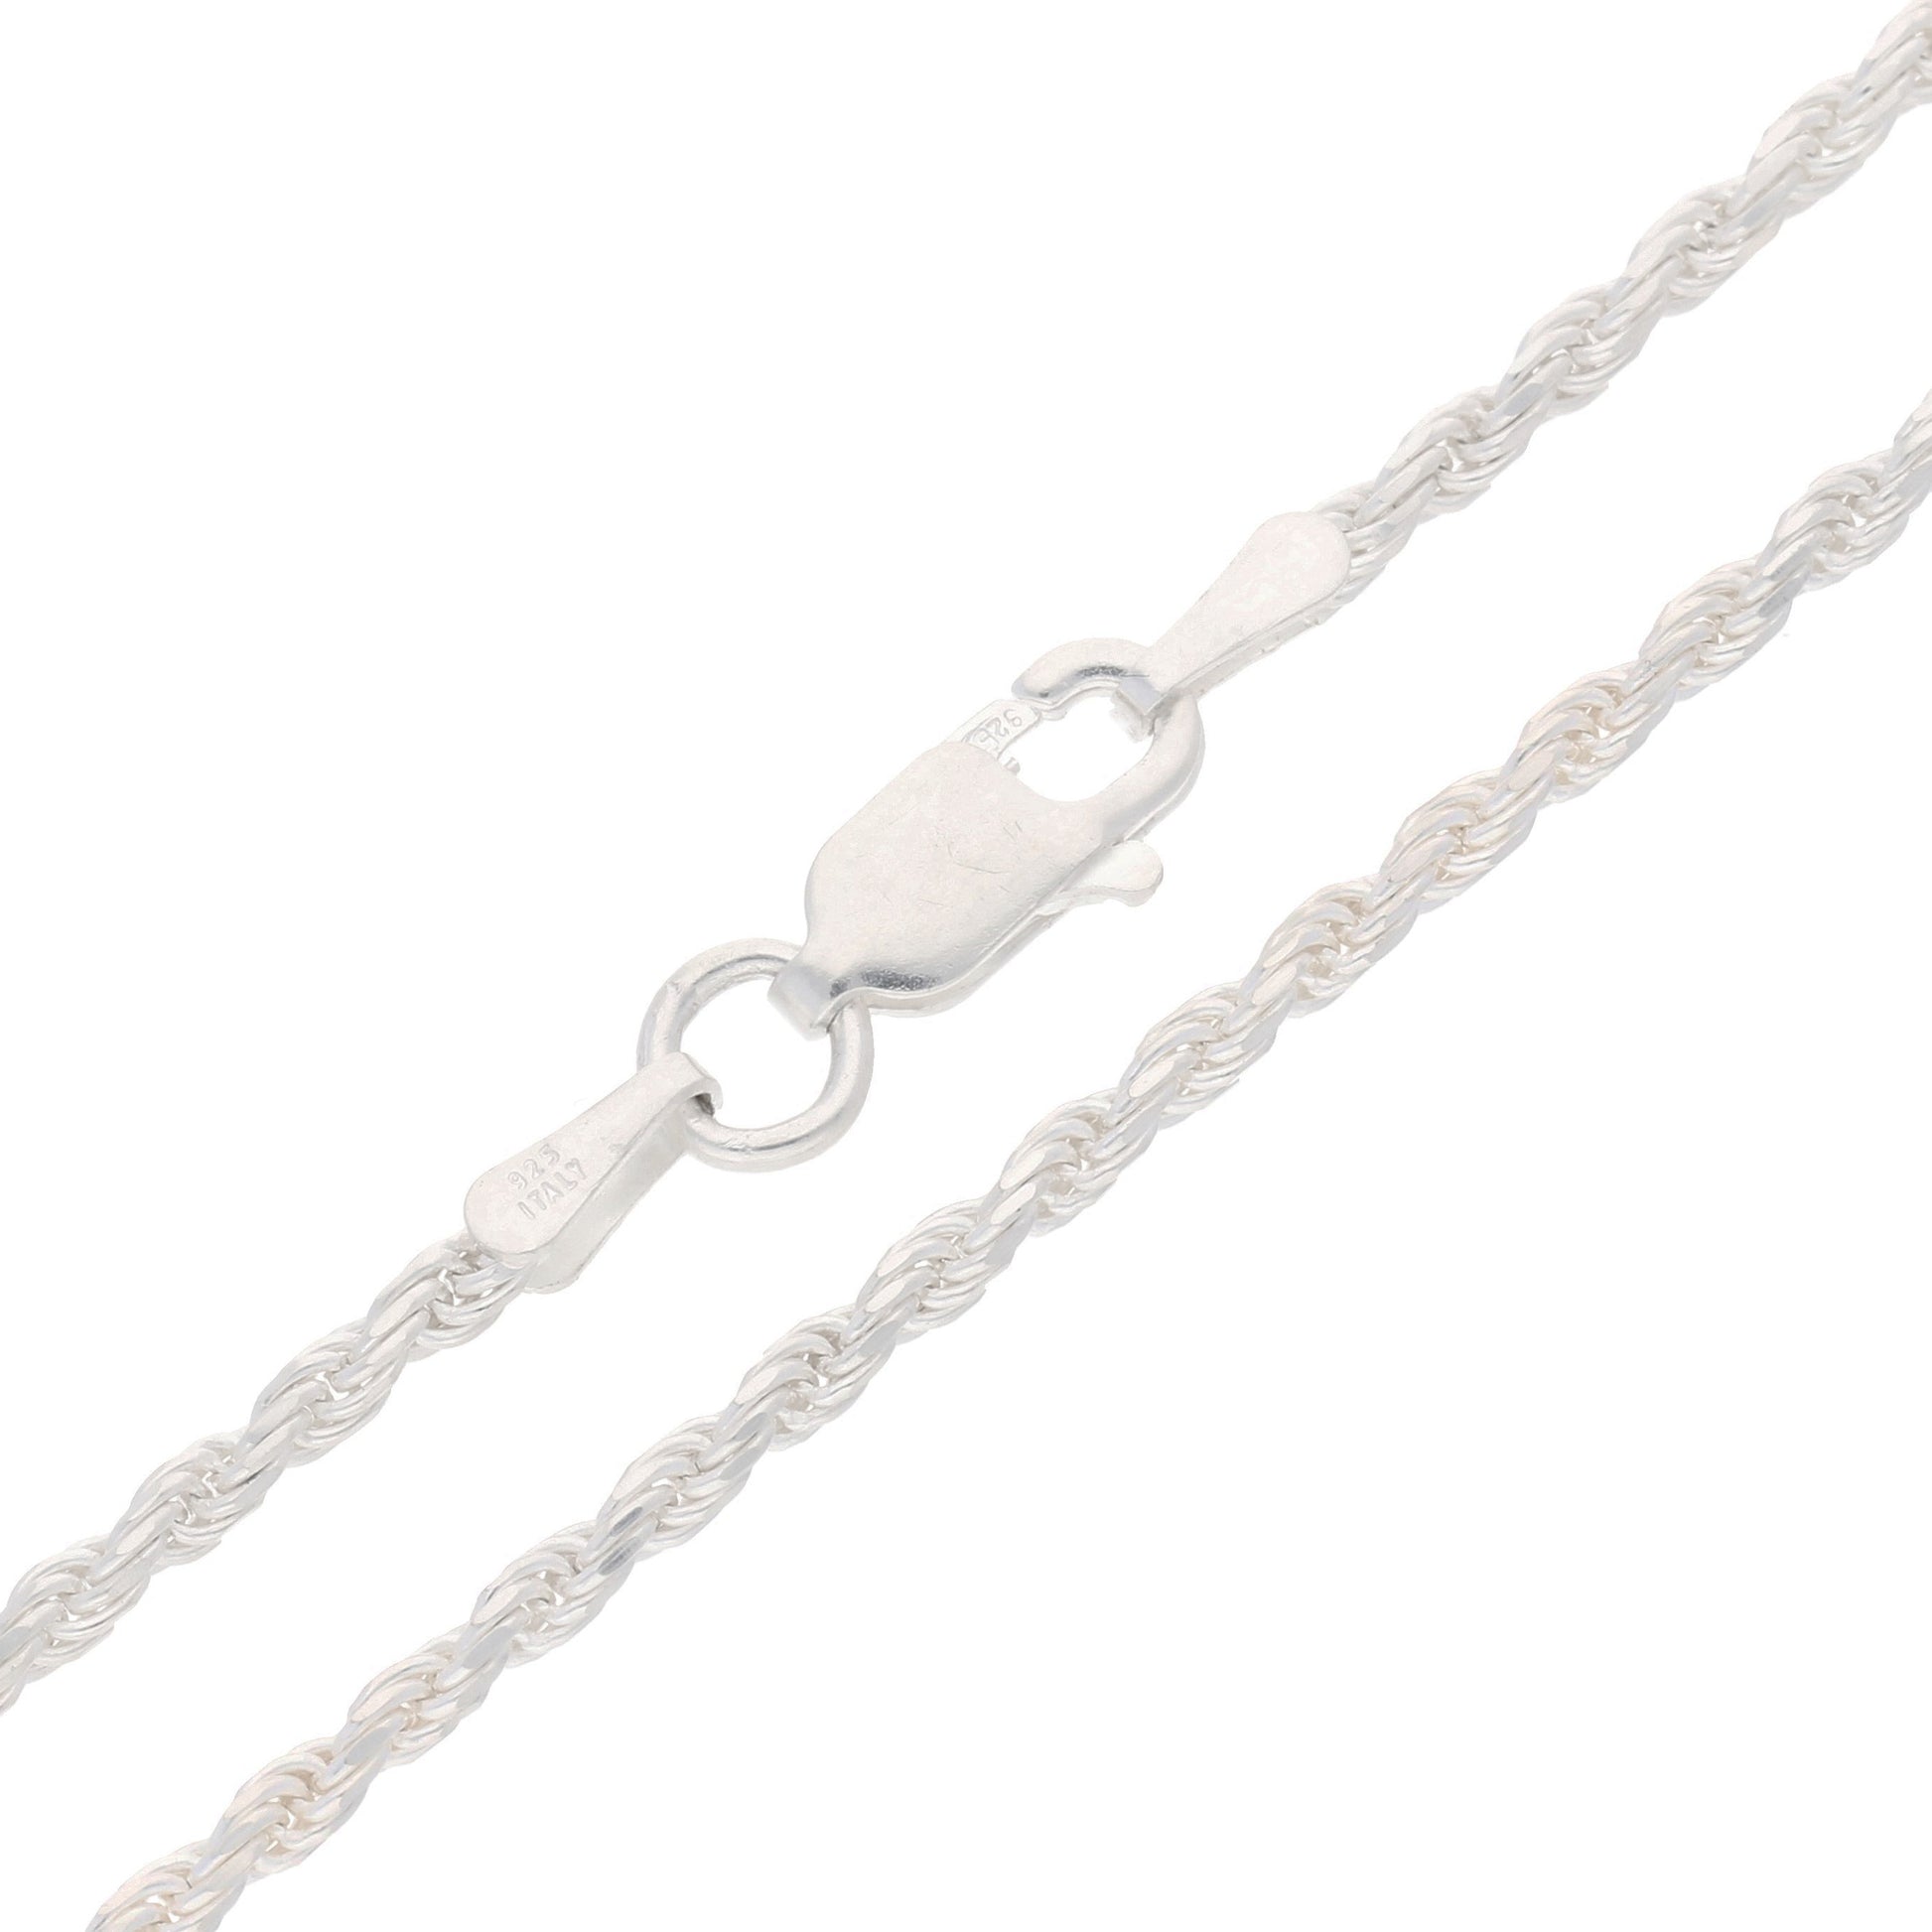 2mm Sterling Silver Diamond-Cut Rope Chain Necklace - Silver Insanity